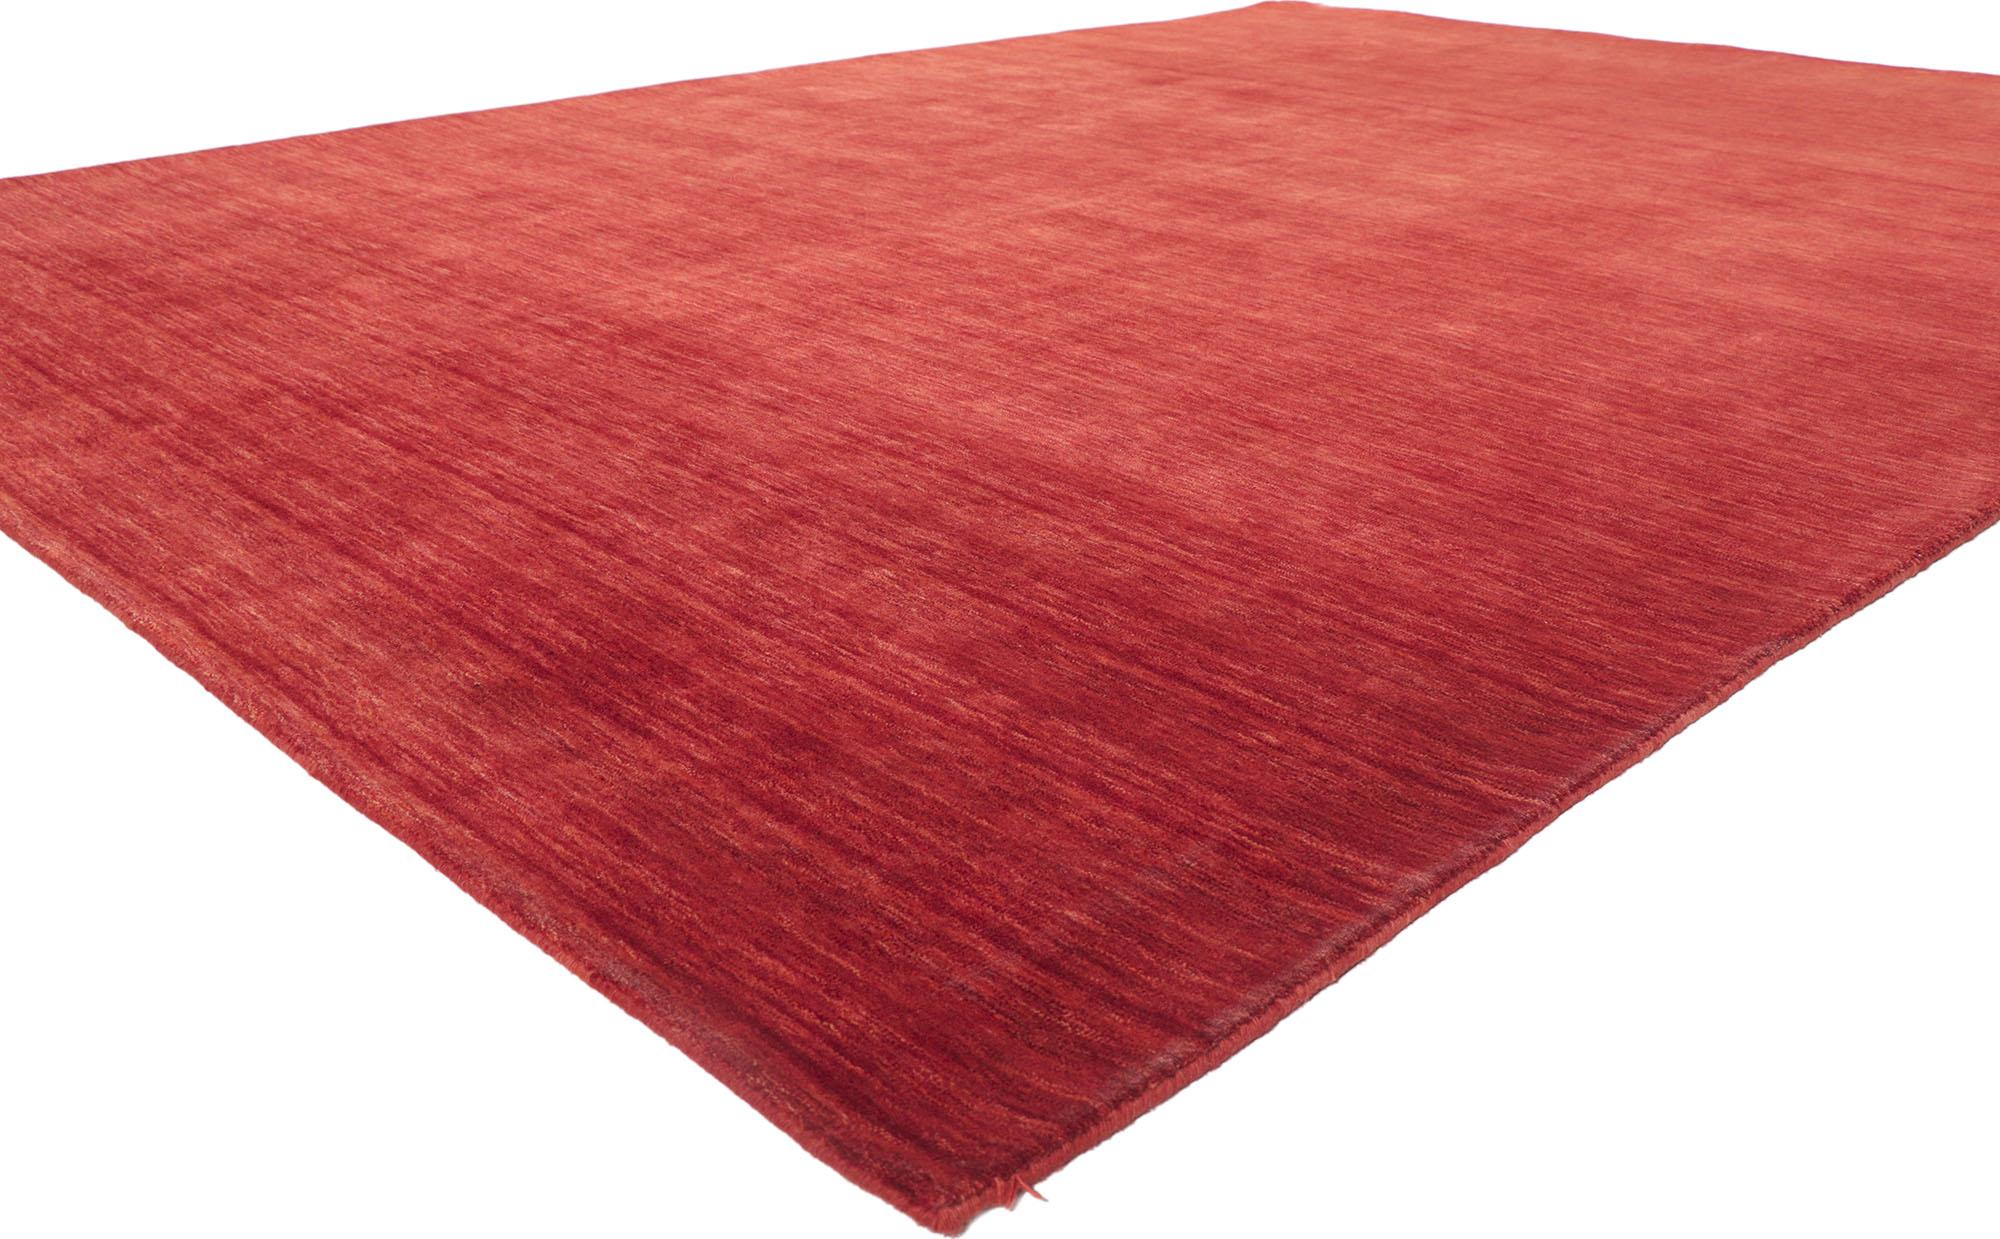 30733 New Contemporary Red Area rug with Modern Style 08'09 x 12'00. Effortless, elegant, and casual meets the eye in this contemporary Indian area rug. It features gorgeous red hues and softly gradated striations running selvage to selvage blending